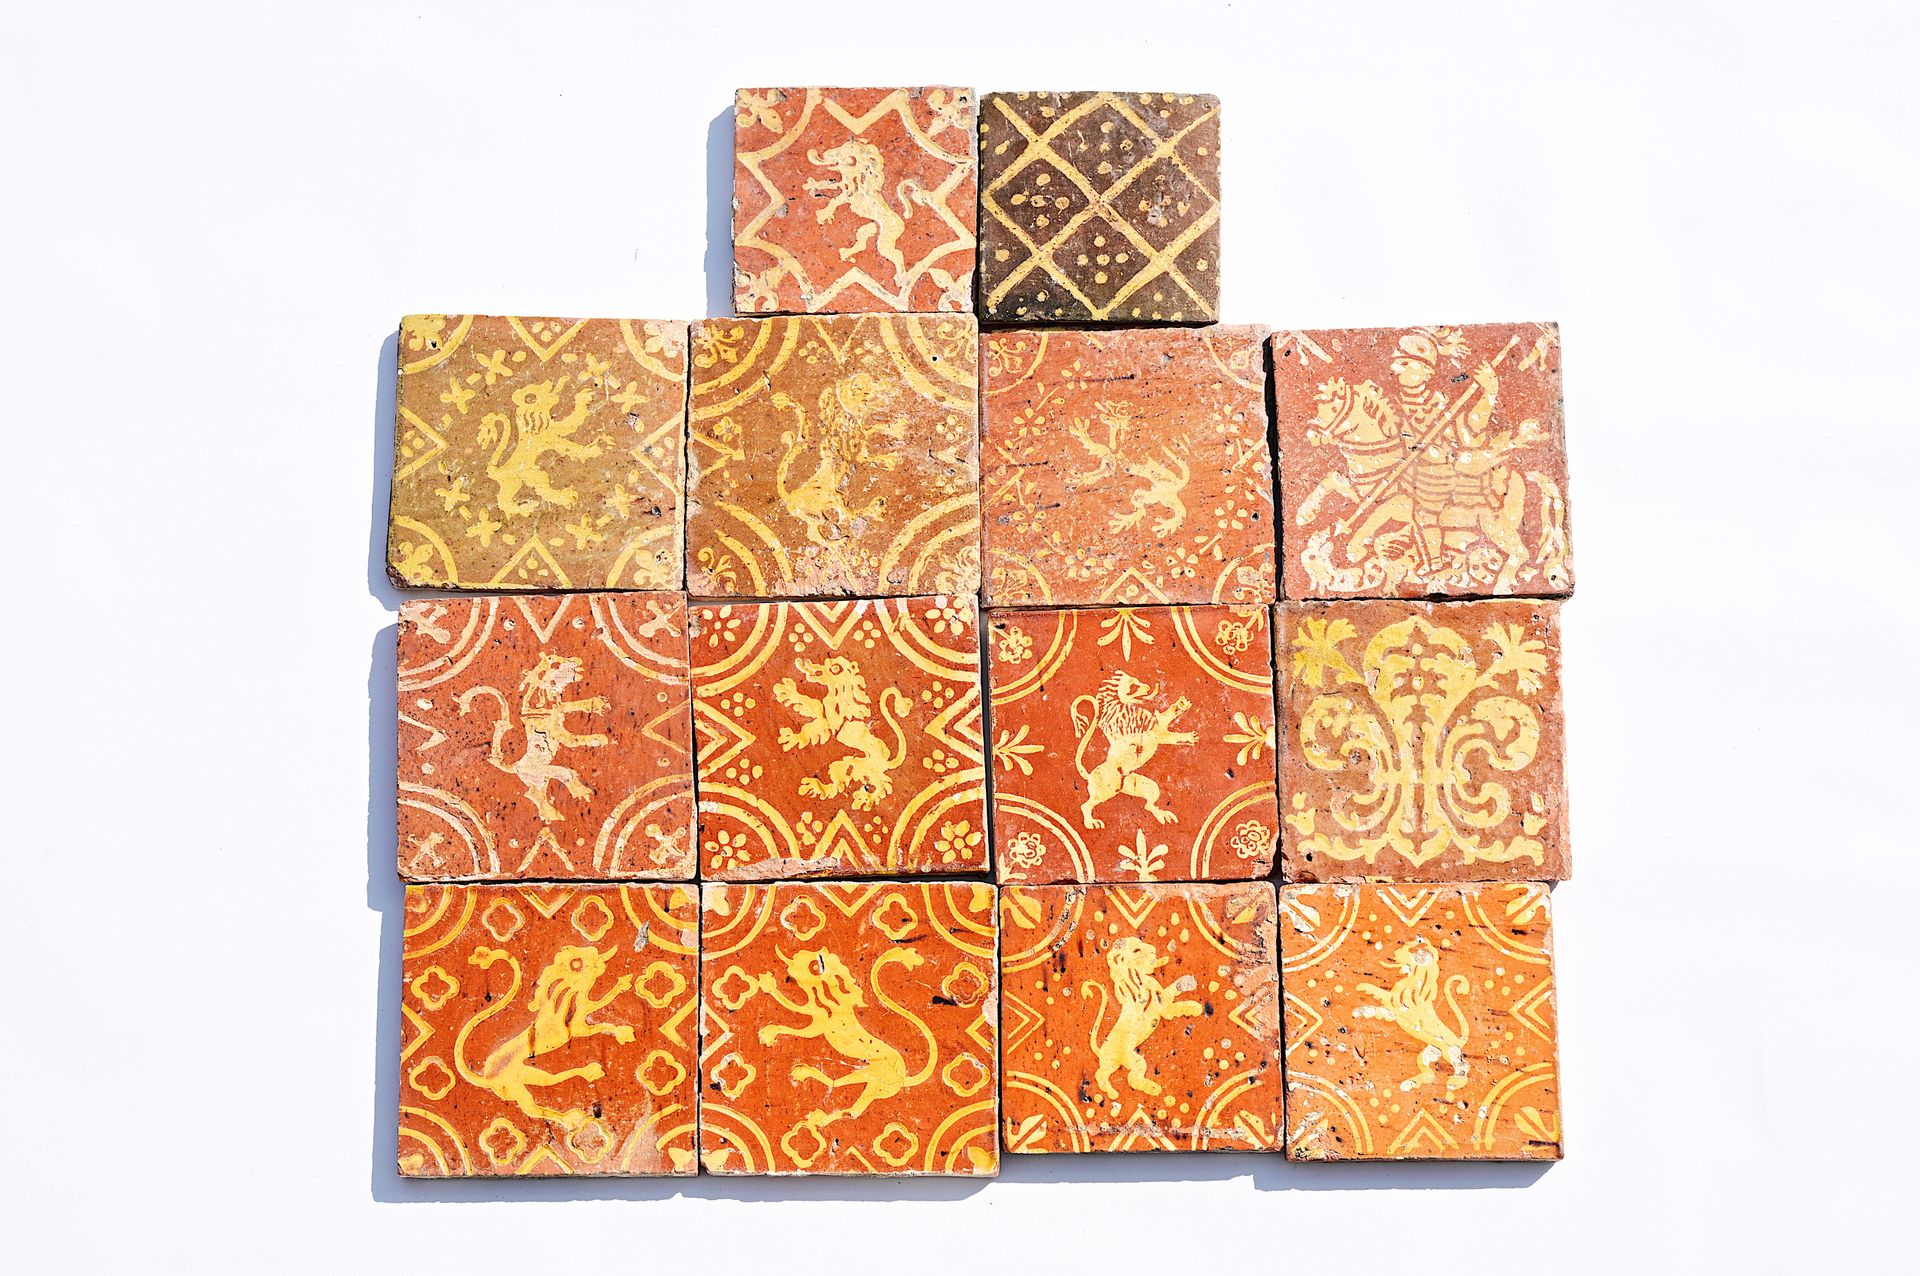 Fourteen Flemish decorated redware tiles in medieval style, 18th/19th C. Vierzeh&hellip;